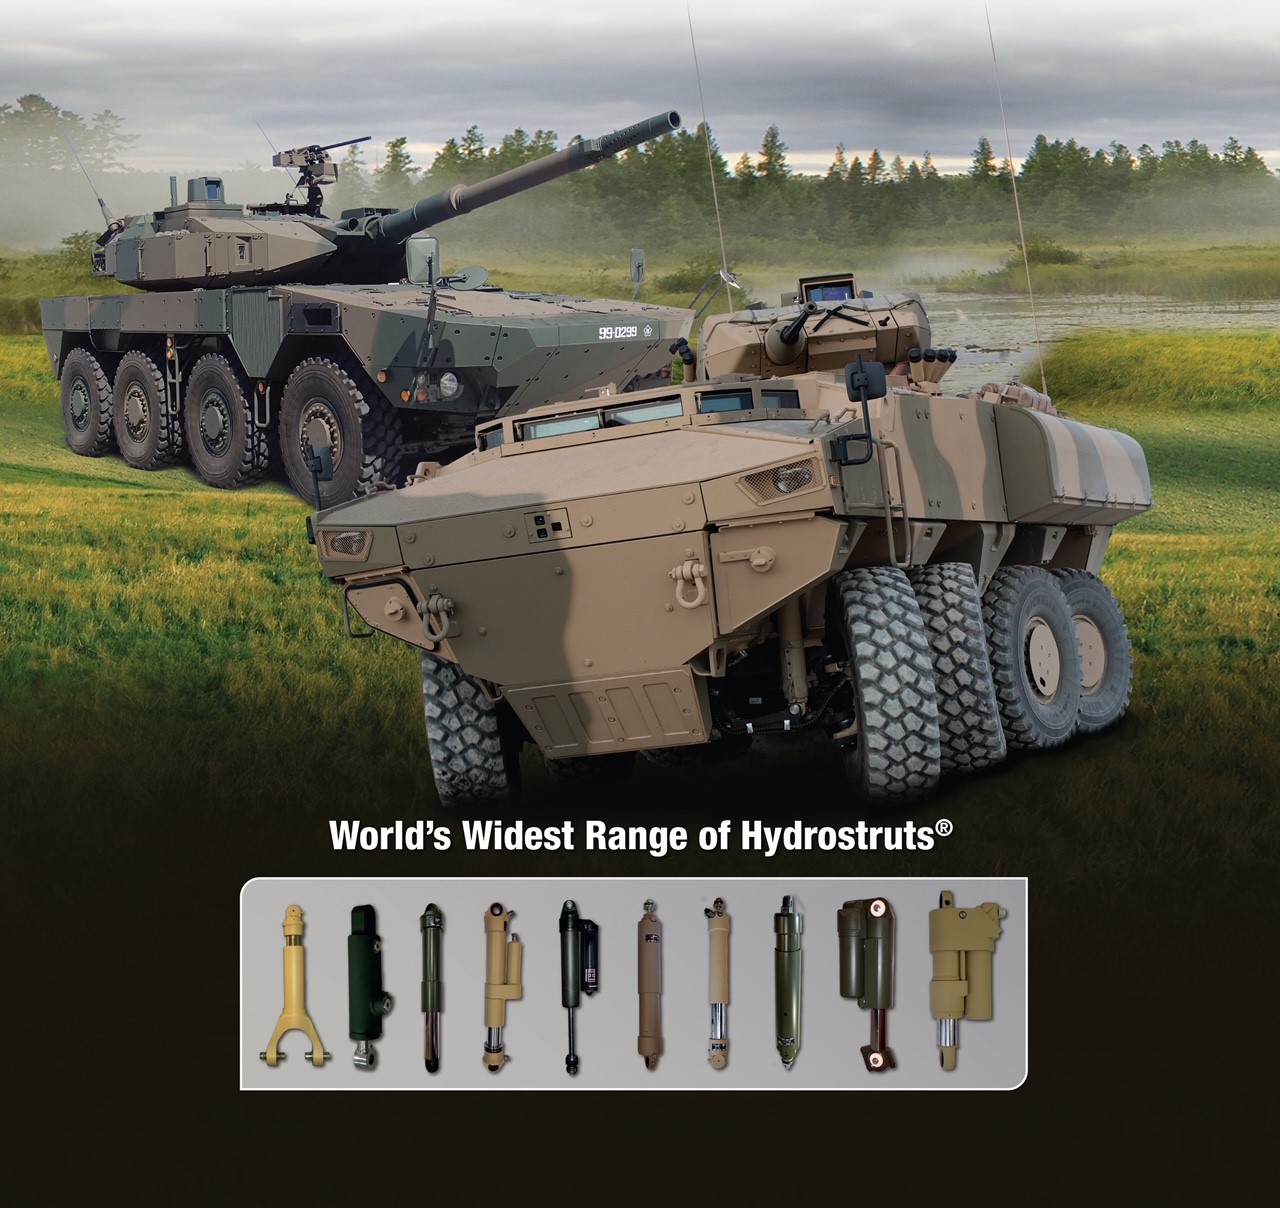 Soucy Defense Division and Horstman Signed MoU To Build New Generation Suspension Systems